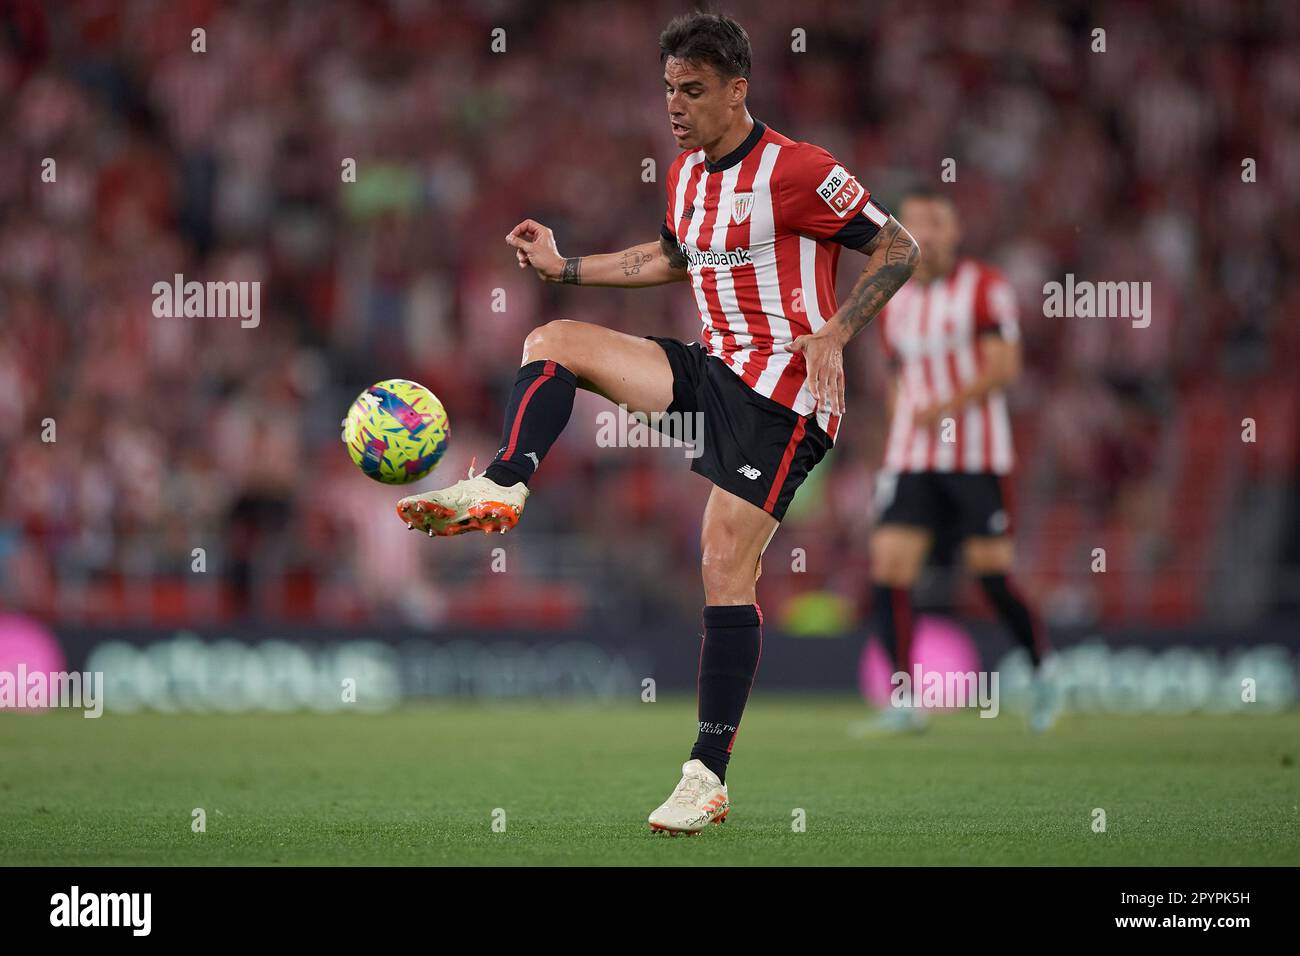 Bilbao, Spain. May 4, 2023, Dani Garcia of Athletic Club during the La Liga match between Athletic Club and Real Betis played at San Mames Stadium on May 4, 2023 in Bilbao, Spain. (Photo by Cesar Ortiz / PRESSIN) Stock Photo